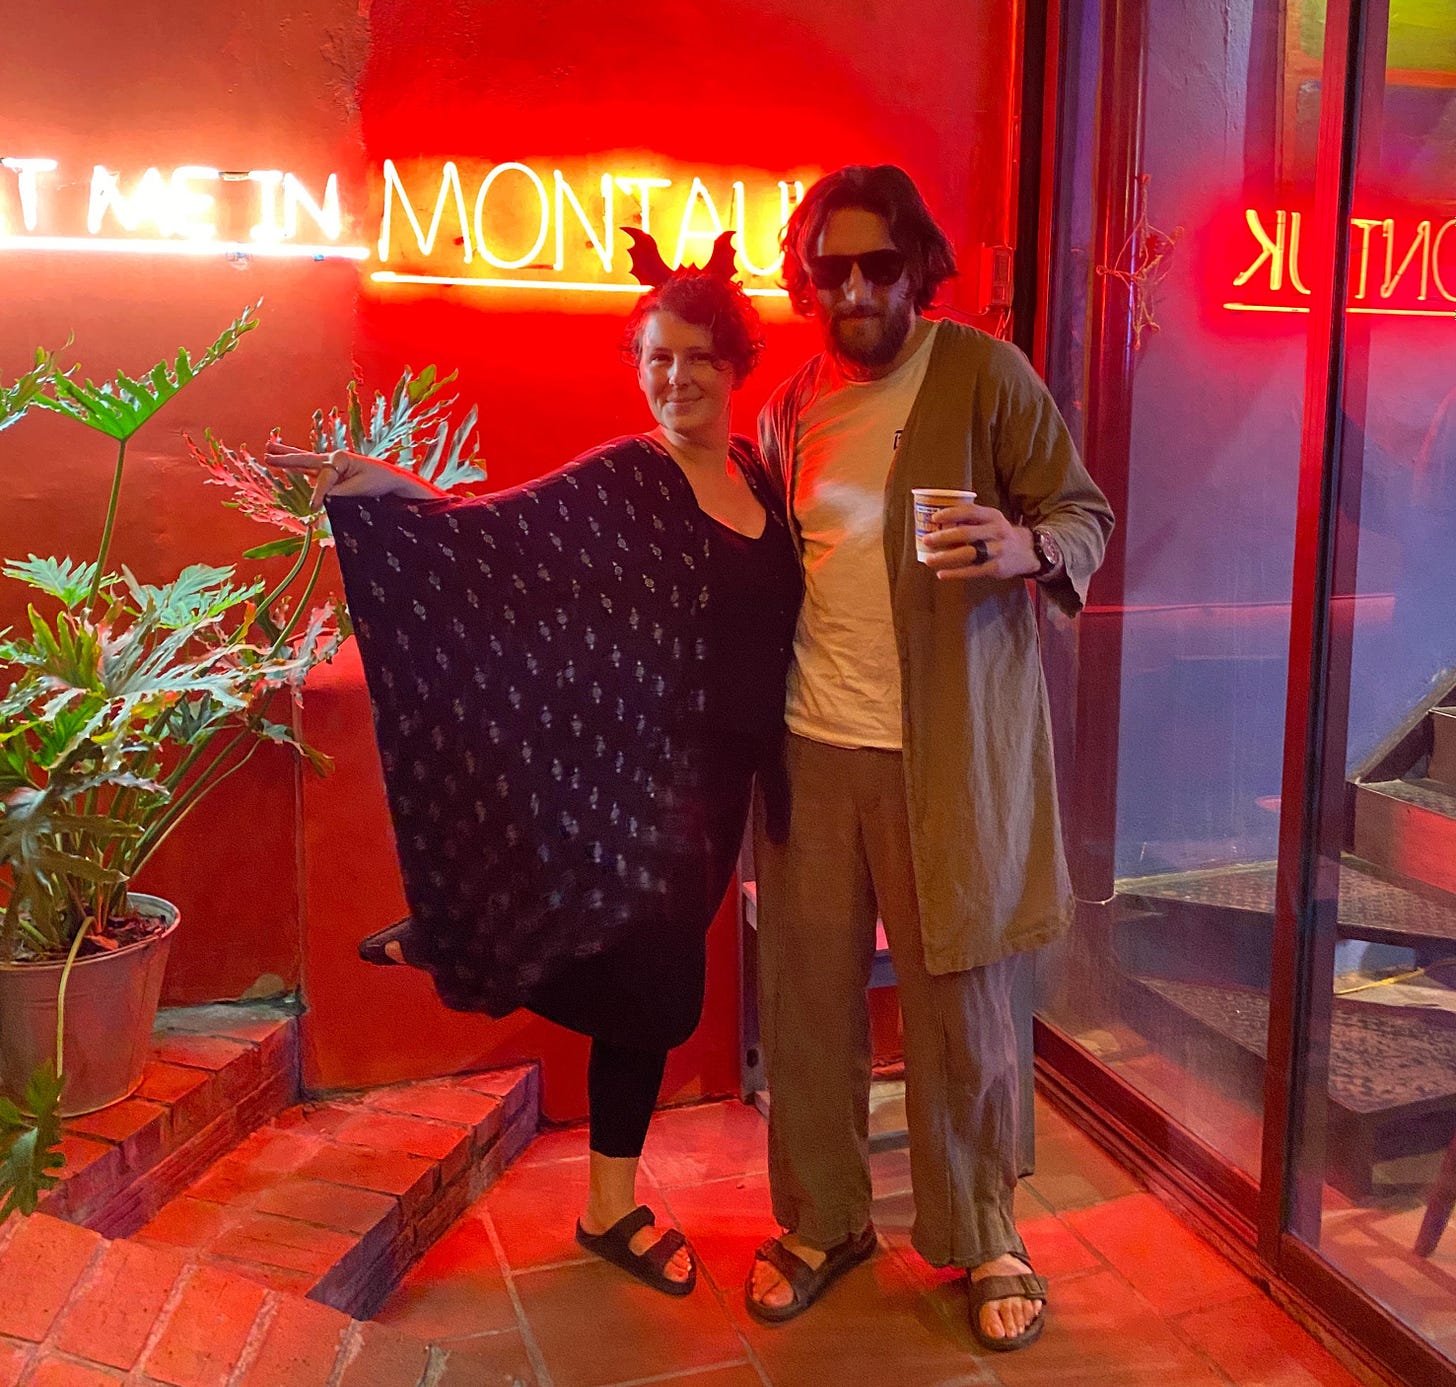 a woman dressed up as a bat stands with a man dressed up as Jeff Bridges from The Big Lebowski